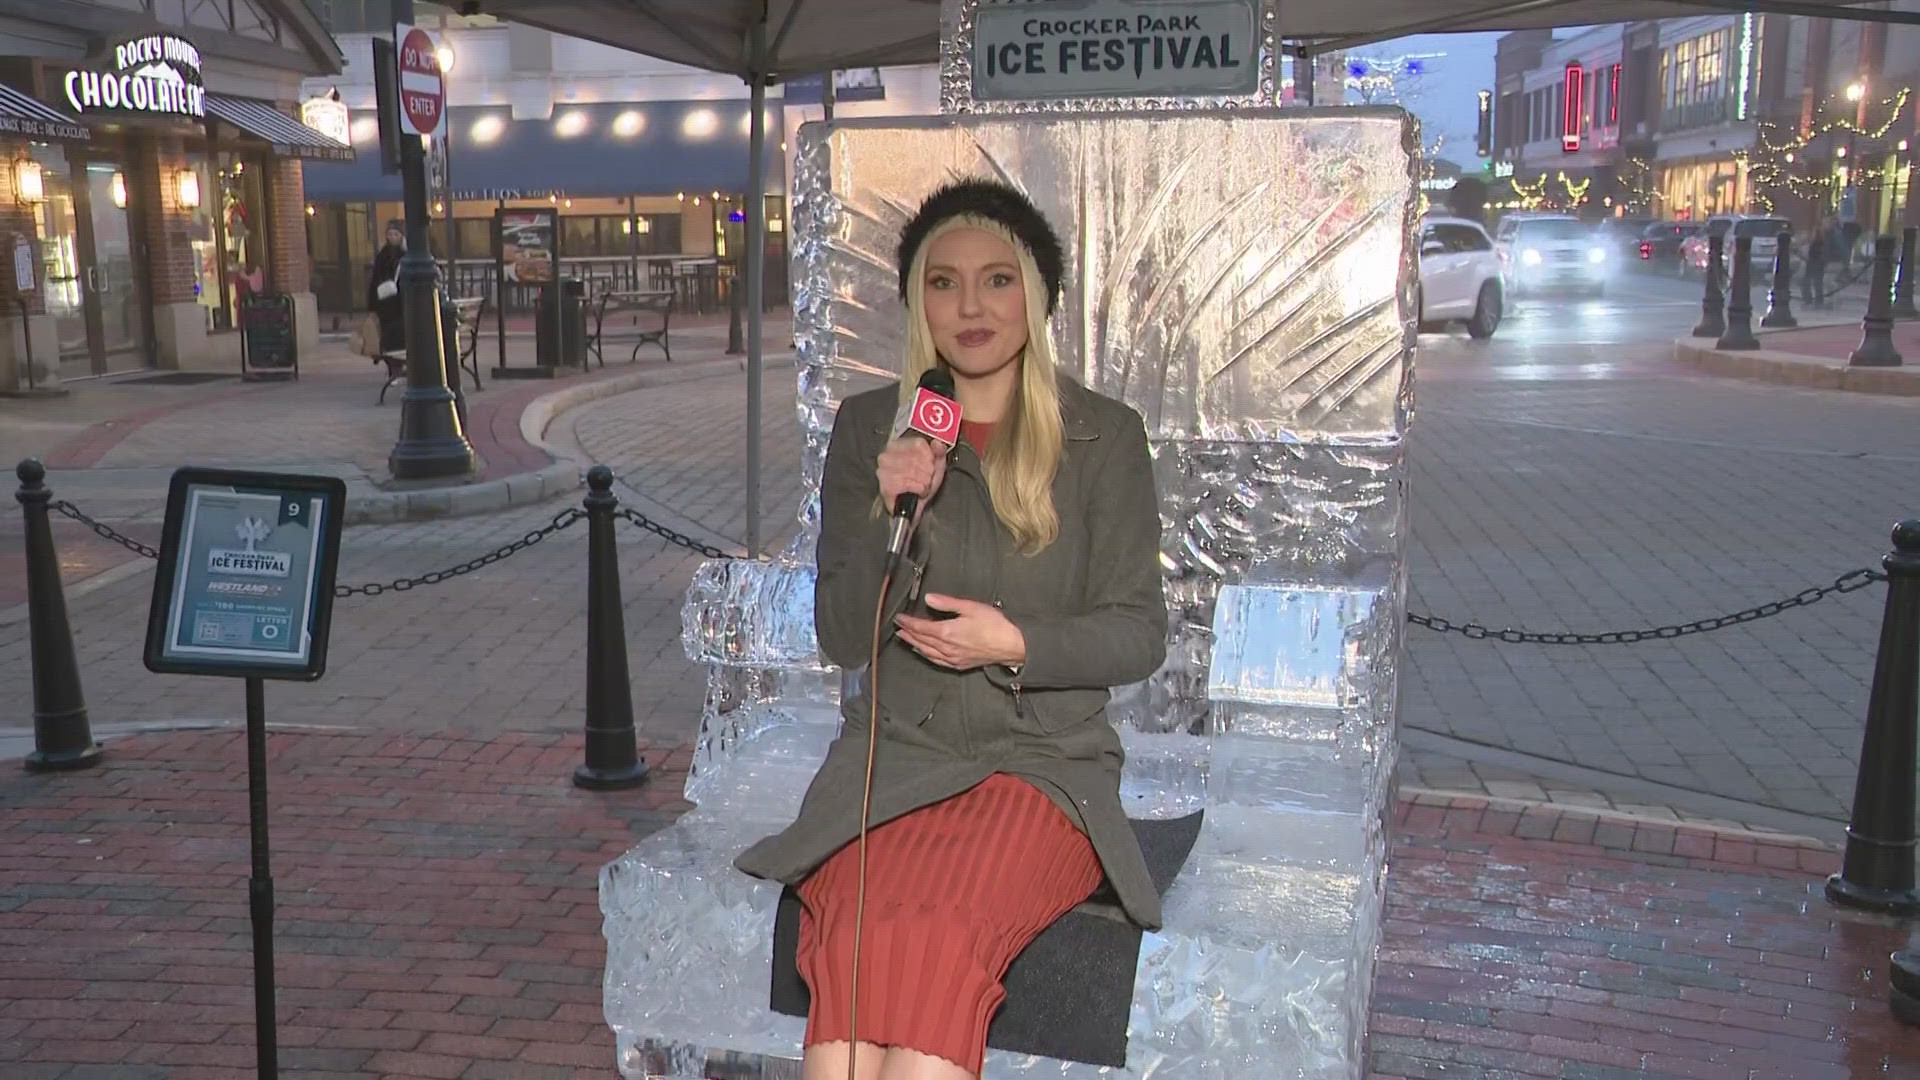 If you're looking for fun winter plans, there are multiple upcoming ice sculpture festivals happening across Northeast Ohio. Stephanie Haney checks in from Westlake.